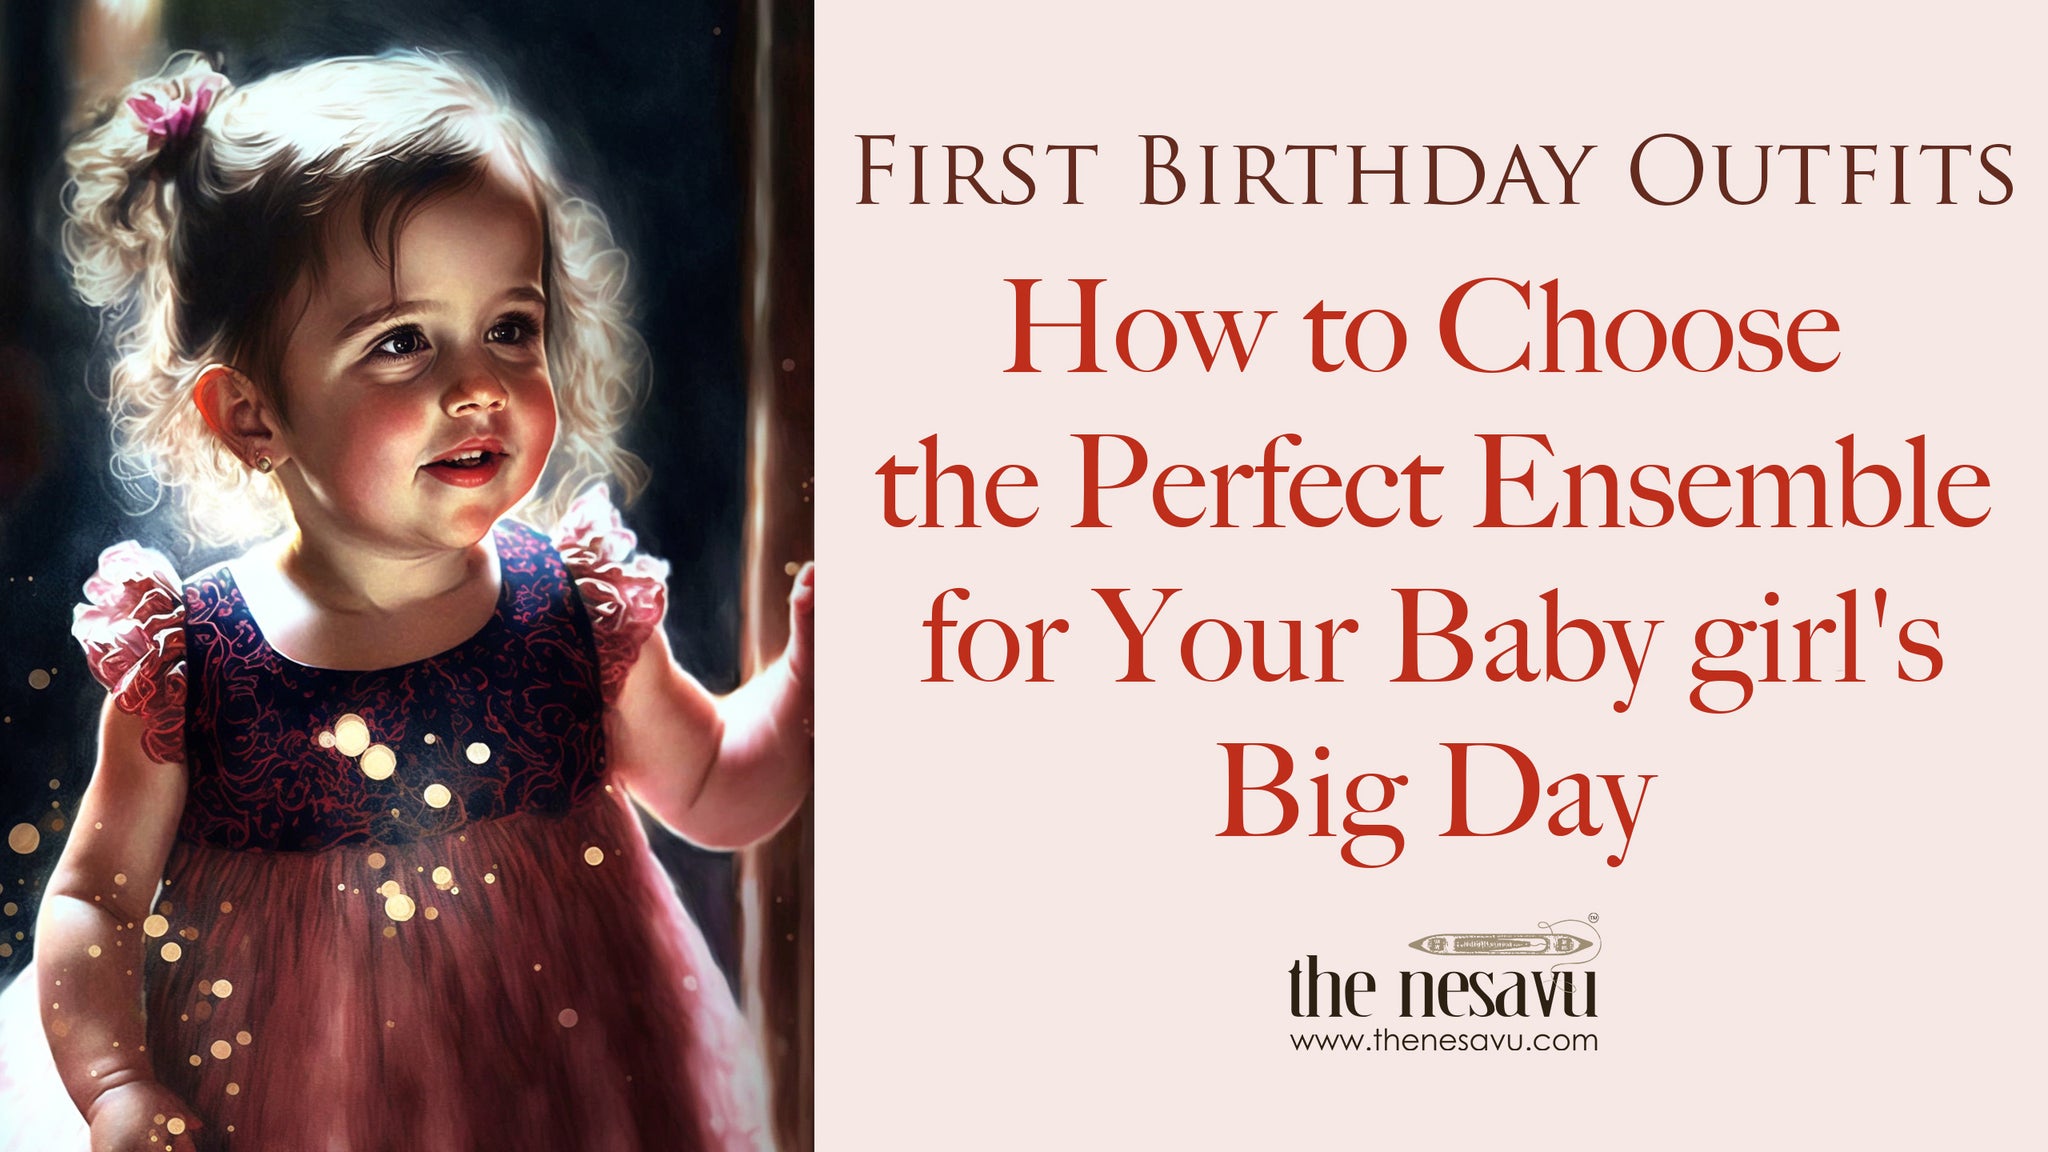 Nesavu First Birthday Outfits: How to Choose the Perfect Ensemble for Your Baby girl's Big Day